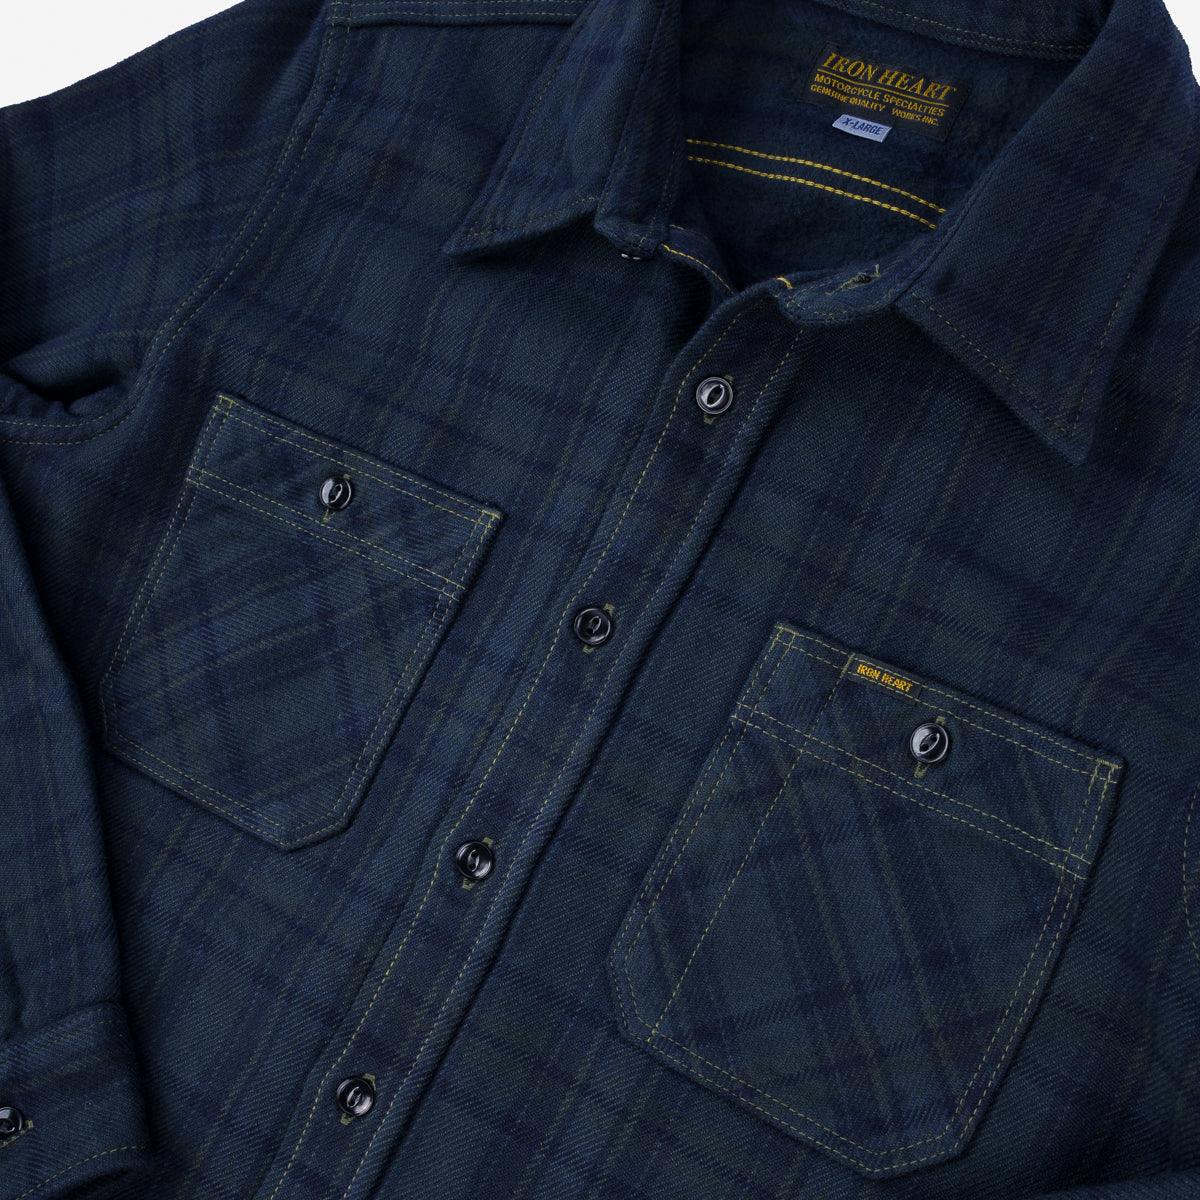 Image showing the IHSH-343-OD - Ultra Heavy Flannel Tartan Check Work Shirt - Green Overdyed Black which is a Shirts described by the following info Iron Heart, New, Released, Shirts, Tops and sold on the IRON HEART GERMANY online store